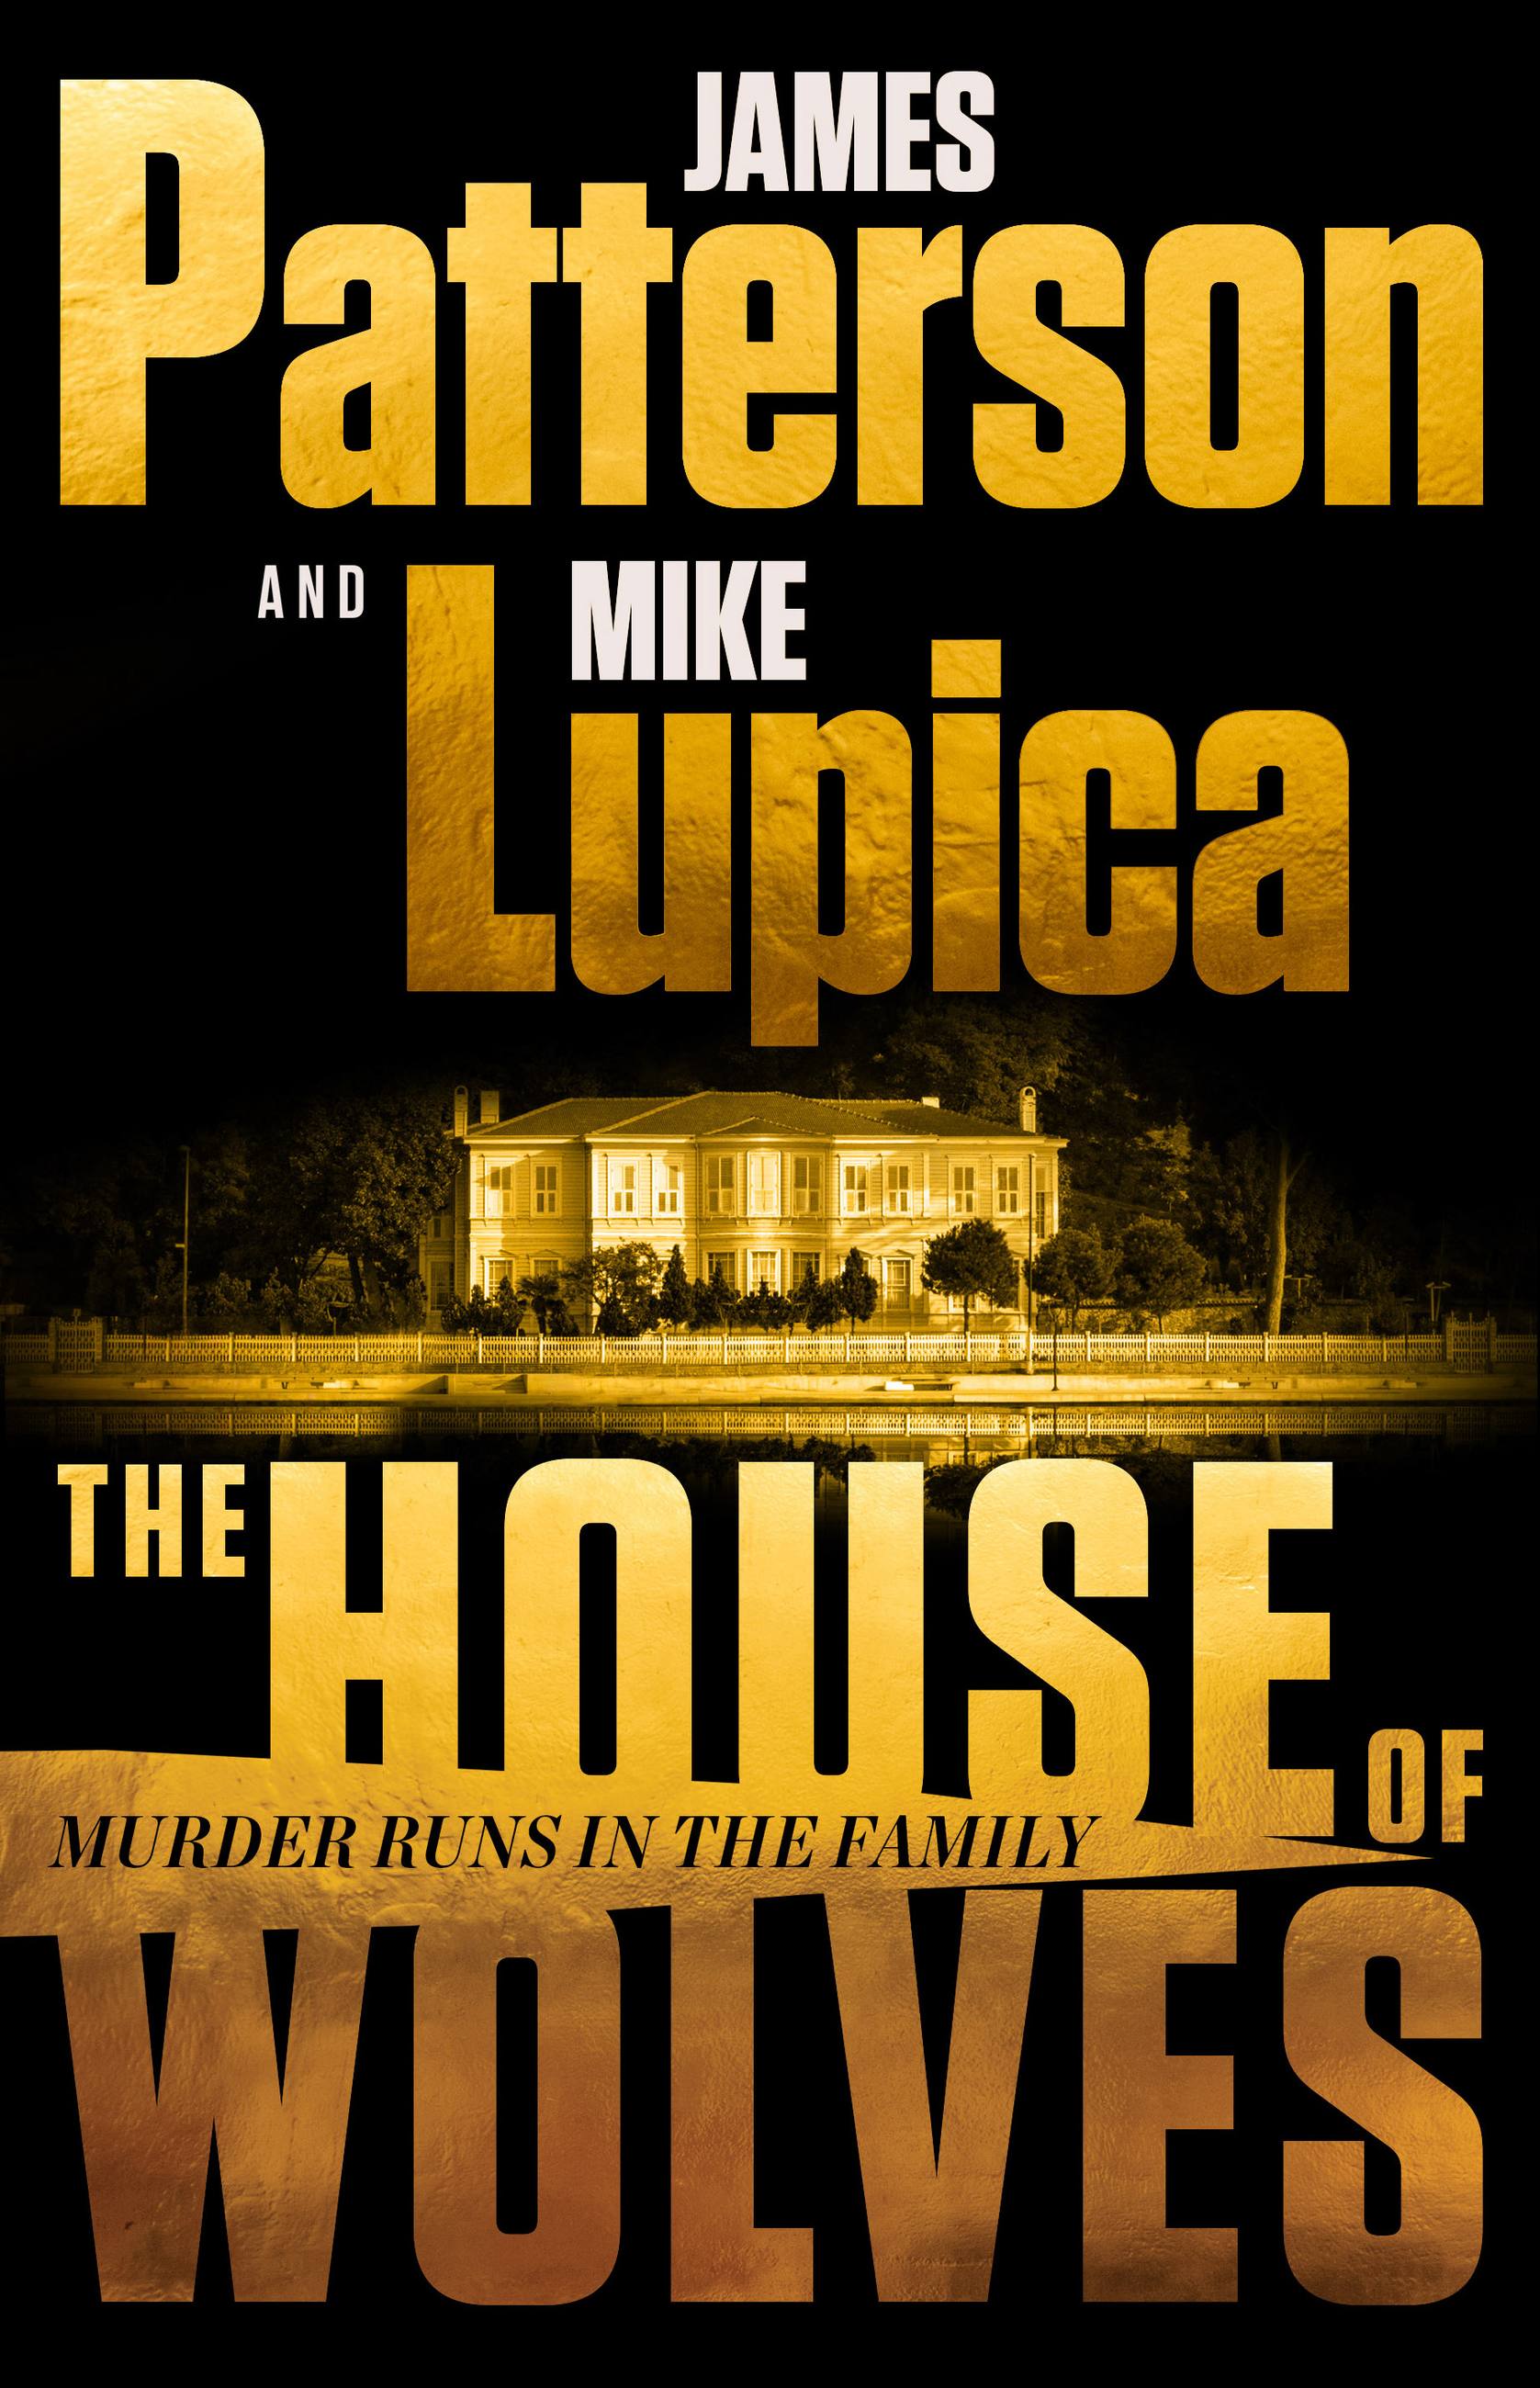 Cover image for The House of Wolves [electronic resource] : Bolder Than Yellowstone or Succession, Patterson and Lupica's Power-Family Thriller Is Not To Be Missed